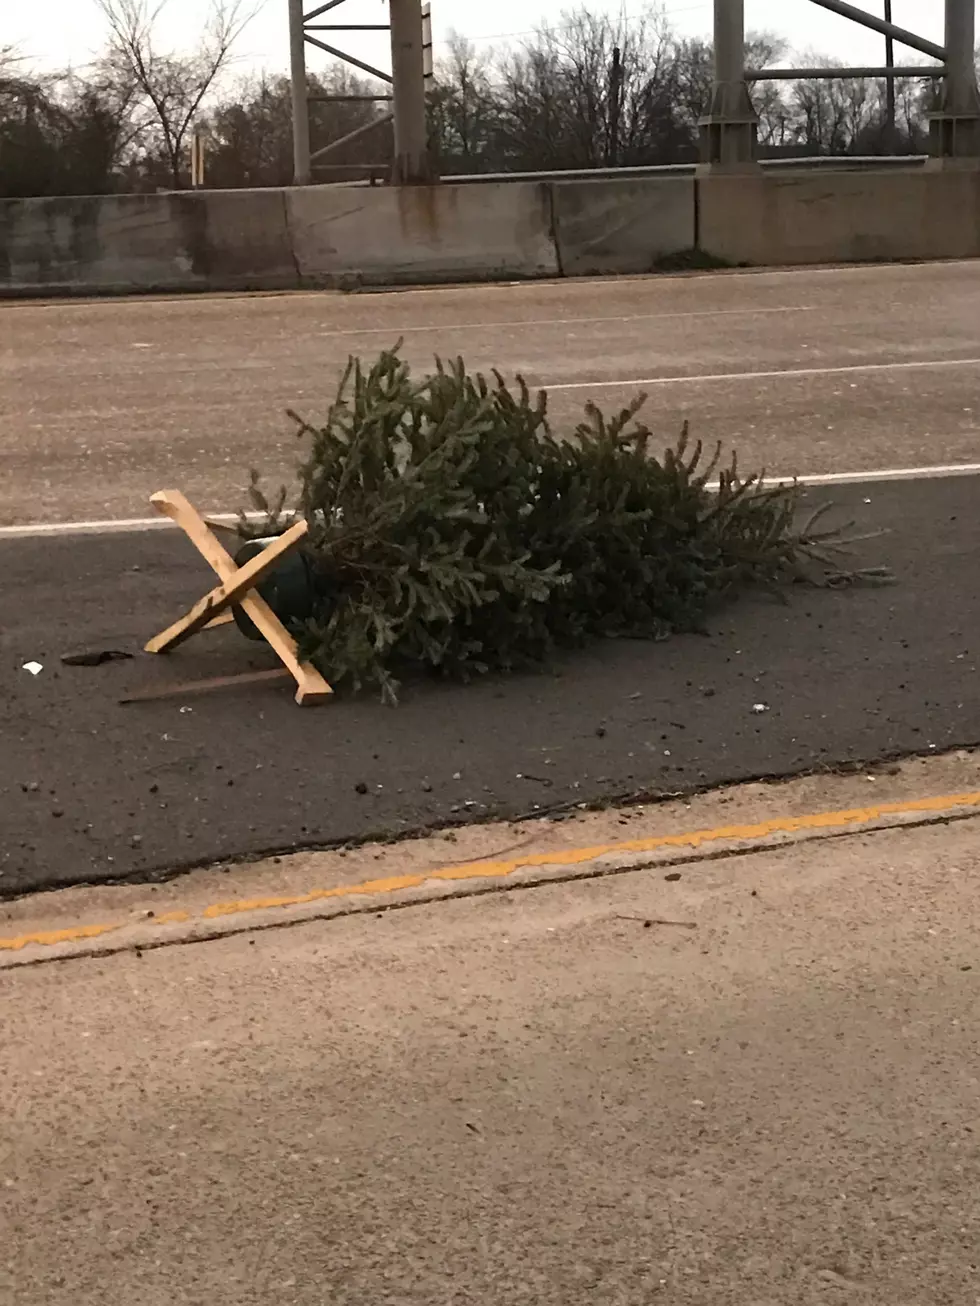 Is 2019 off to a Bad Start if You Hit a Christmas Tree on I-20?